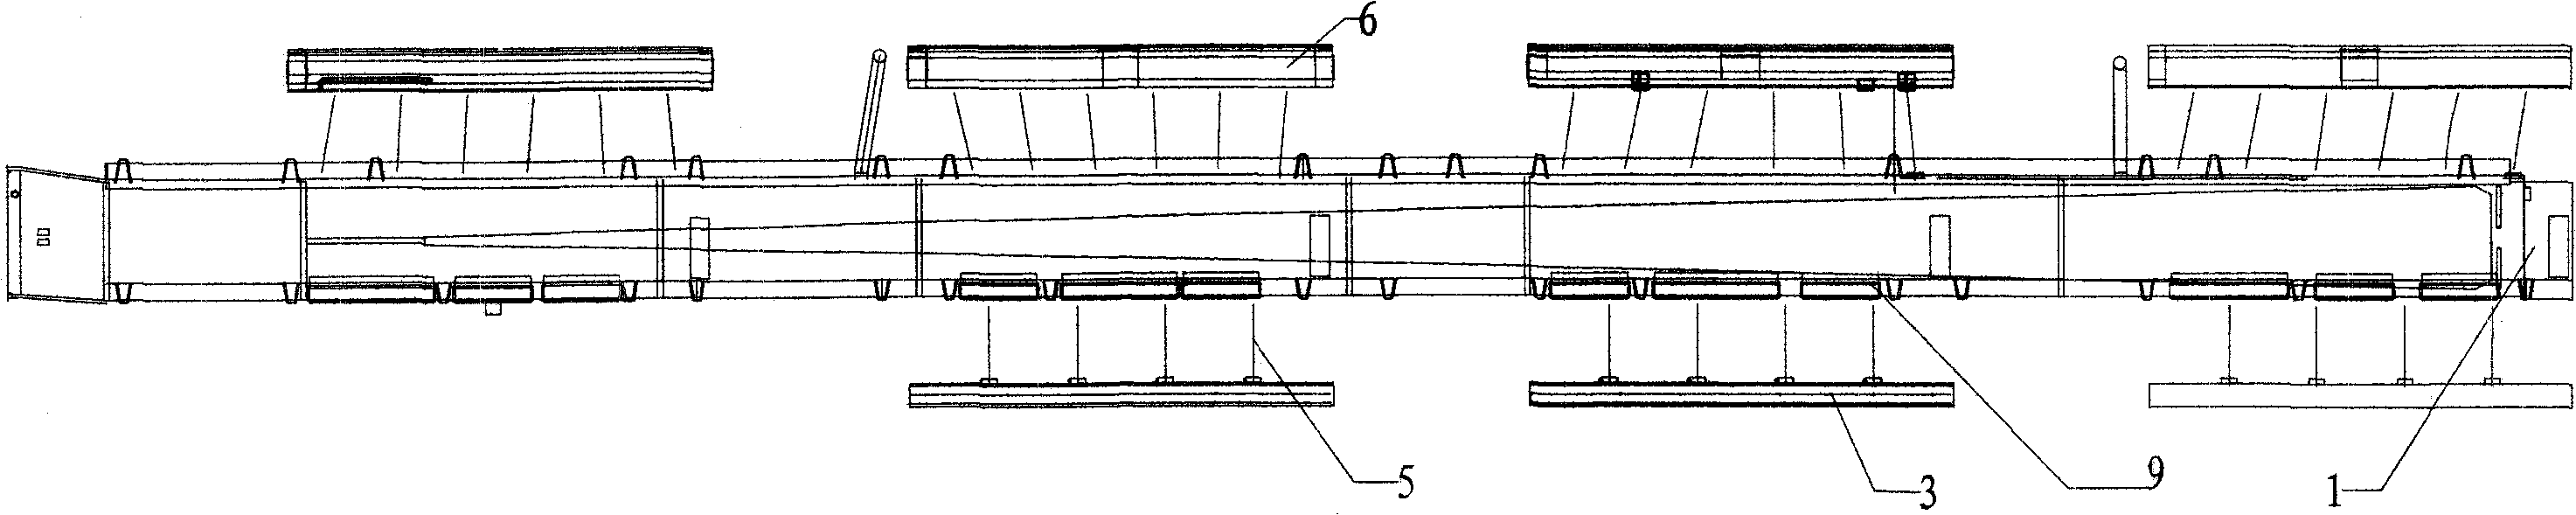 External variable-cross-section balanced ventilation system for rapid trains